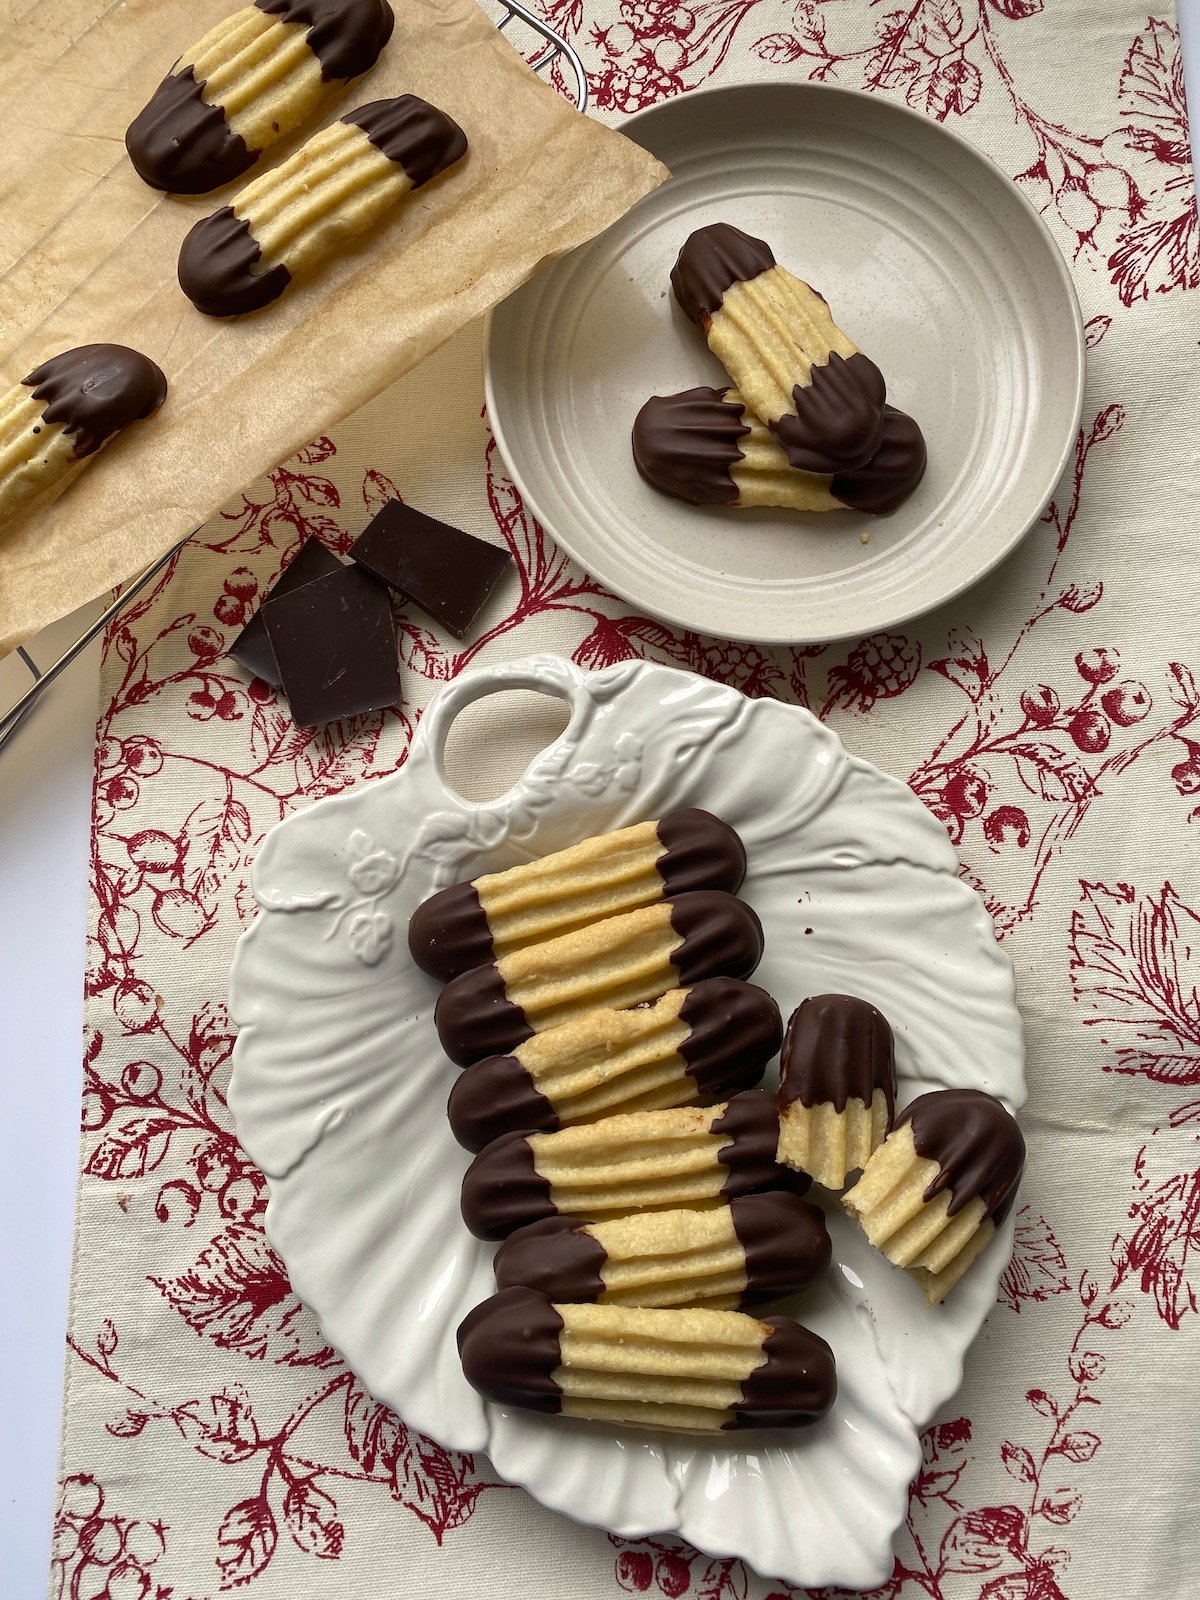 Chocolate Dipped Viennese Fingers on a shite plate.